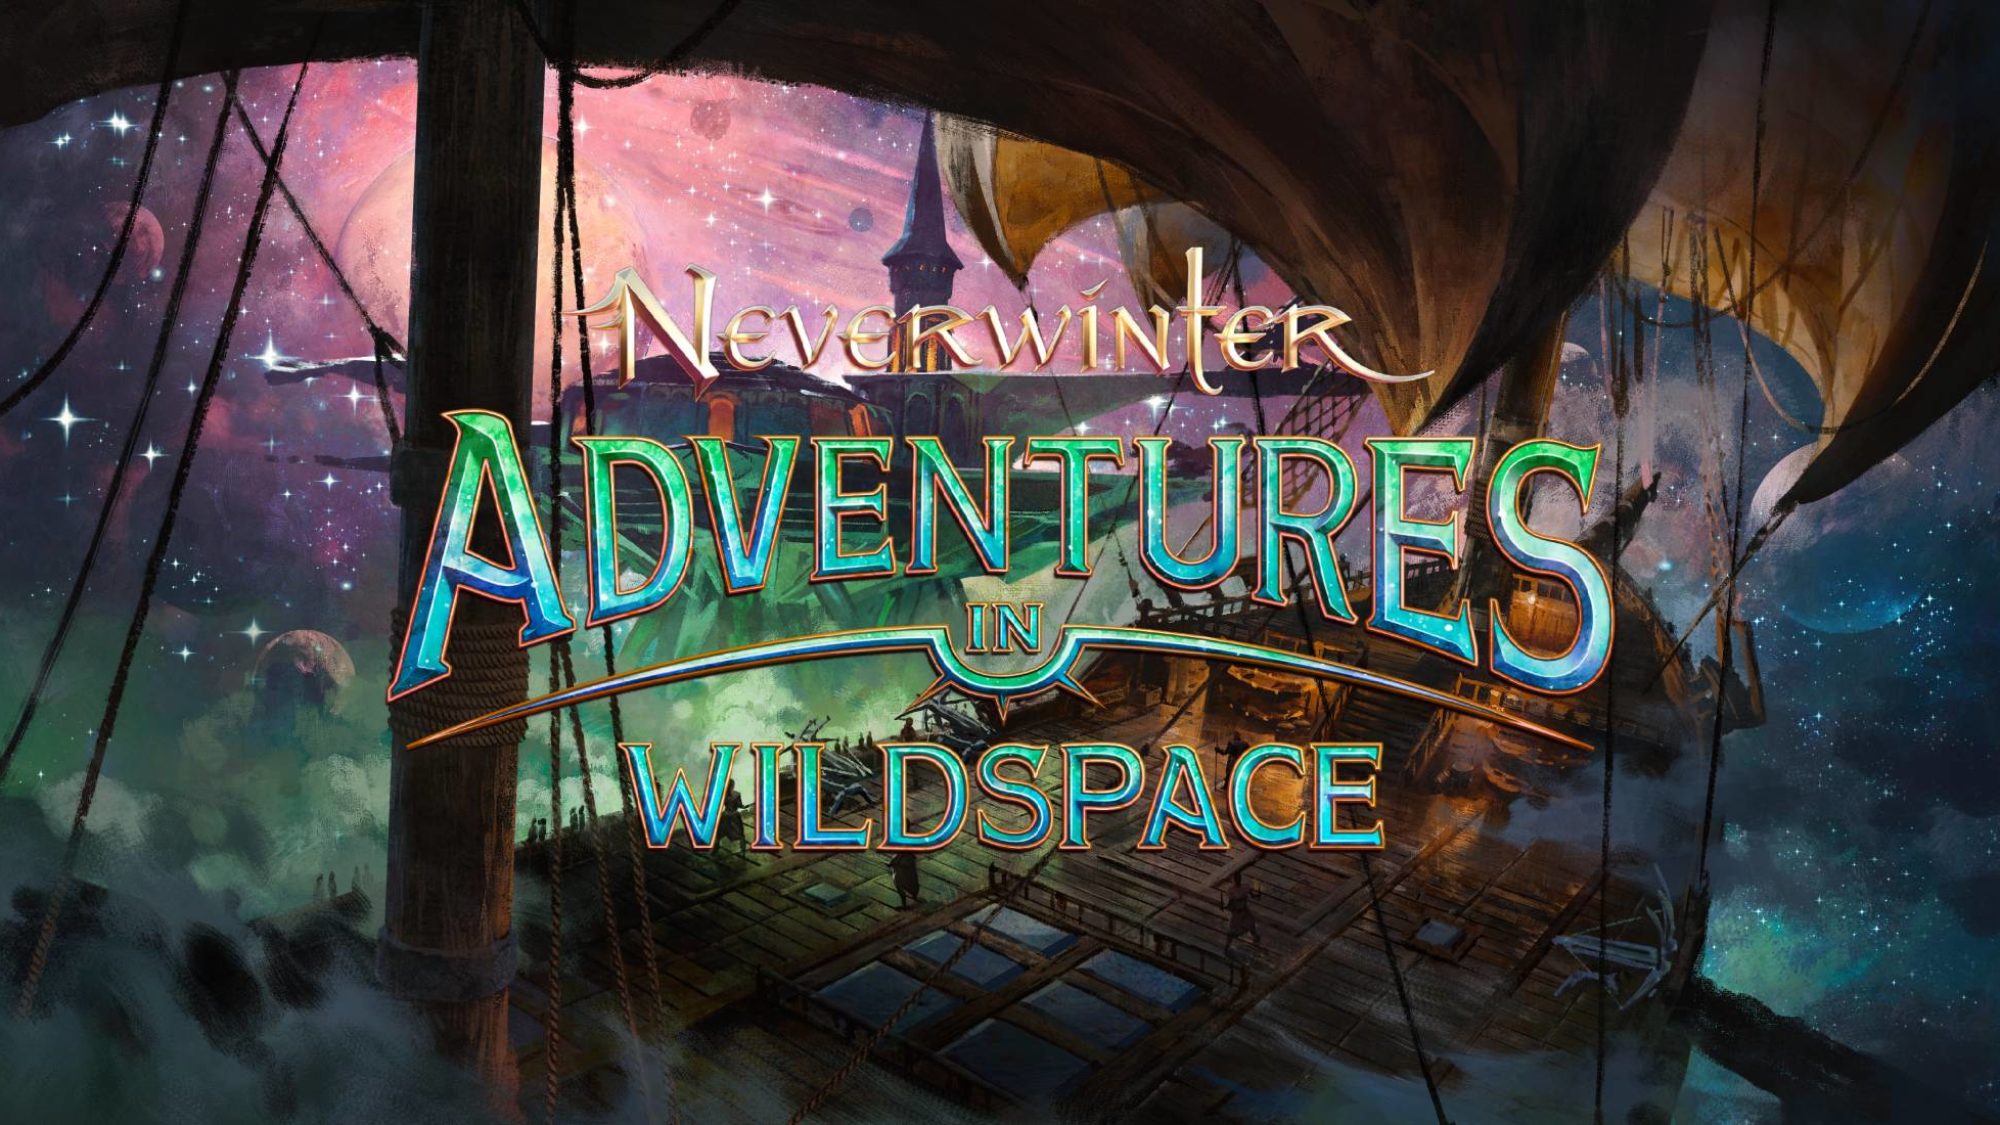 Neverwinter's Latest Expansion "Adventures in Wildspace" Introduces "The Imperial Citadel" and New Heroic Encounters 5